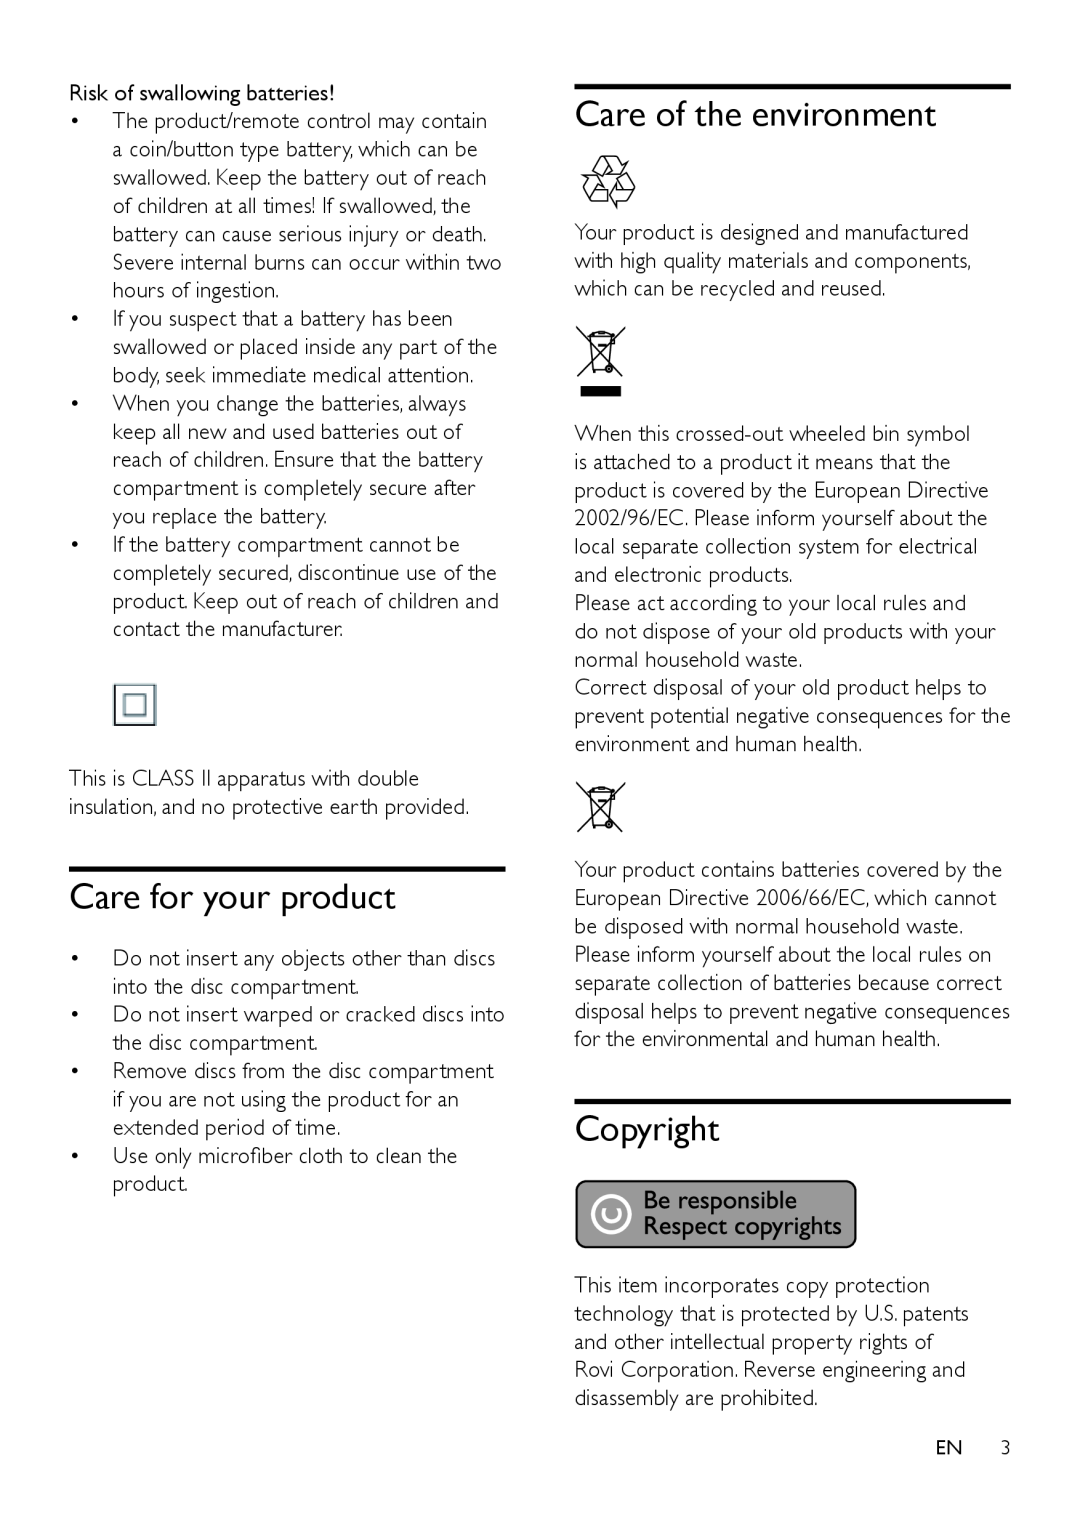 Philips HTD3510, HTD3570, HTD3540 user manual Care for your product, Care of the environment, Copyright 